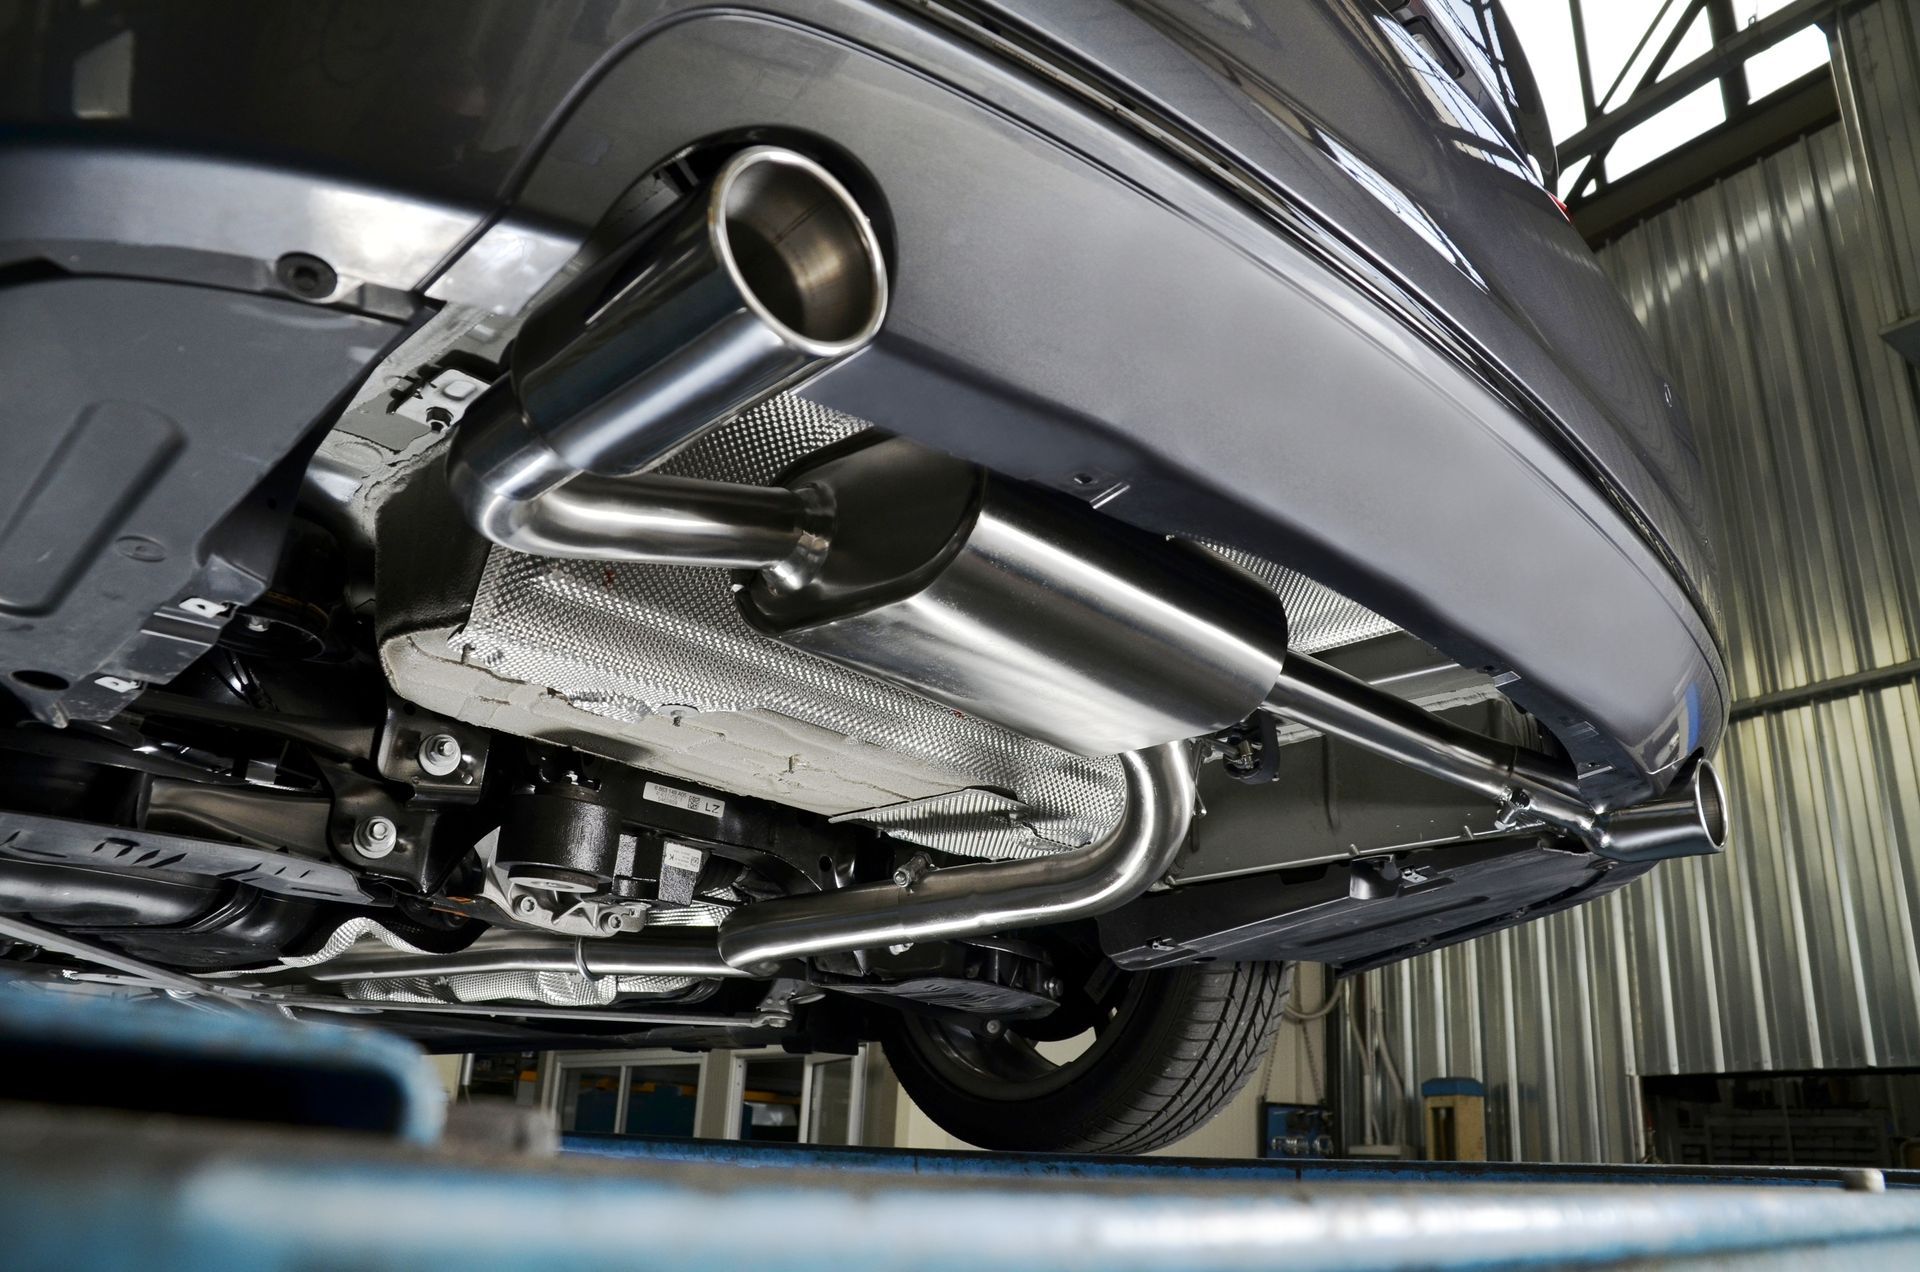 Exhaust Service at ﻿Future Tire and Automotive﻿ in ﻿Holbrook, Lakeside, Pinetop, and Show Low, AZ﻿